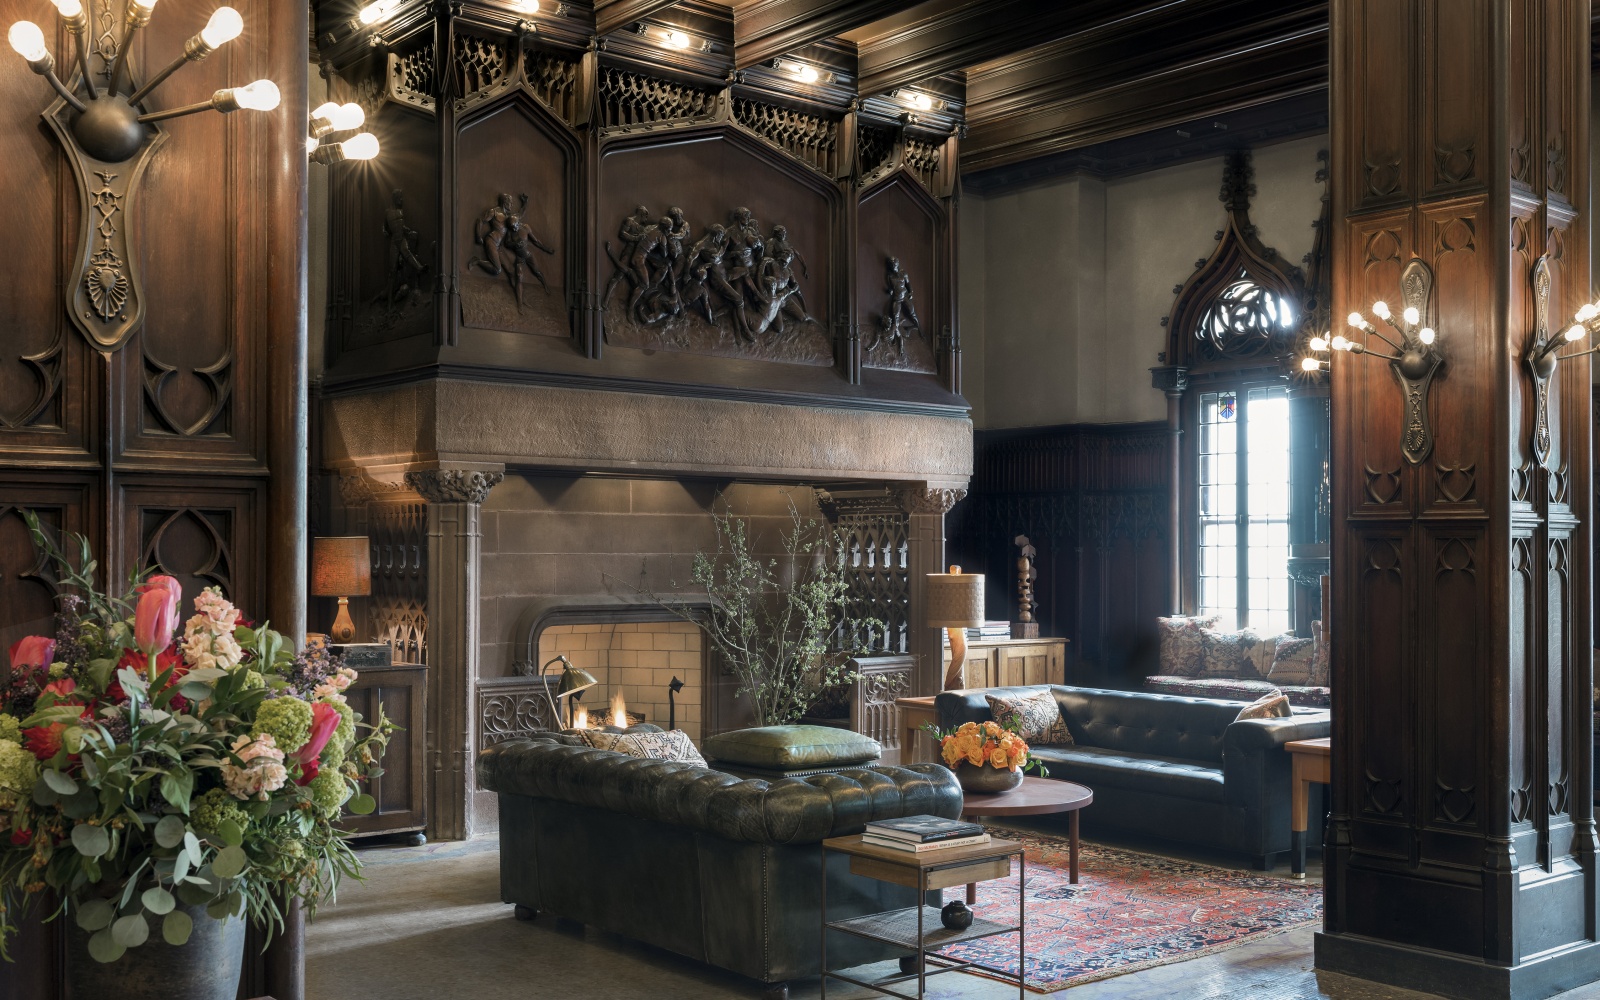 Chicago Athletic Association Hotel: Drawing Room